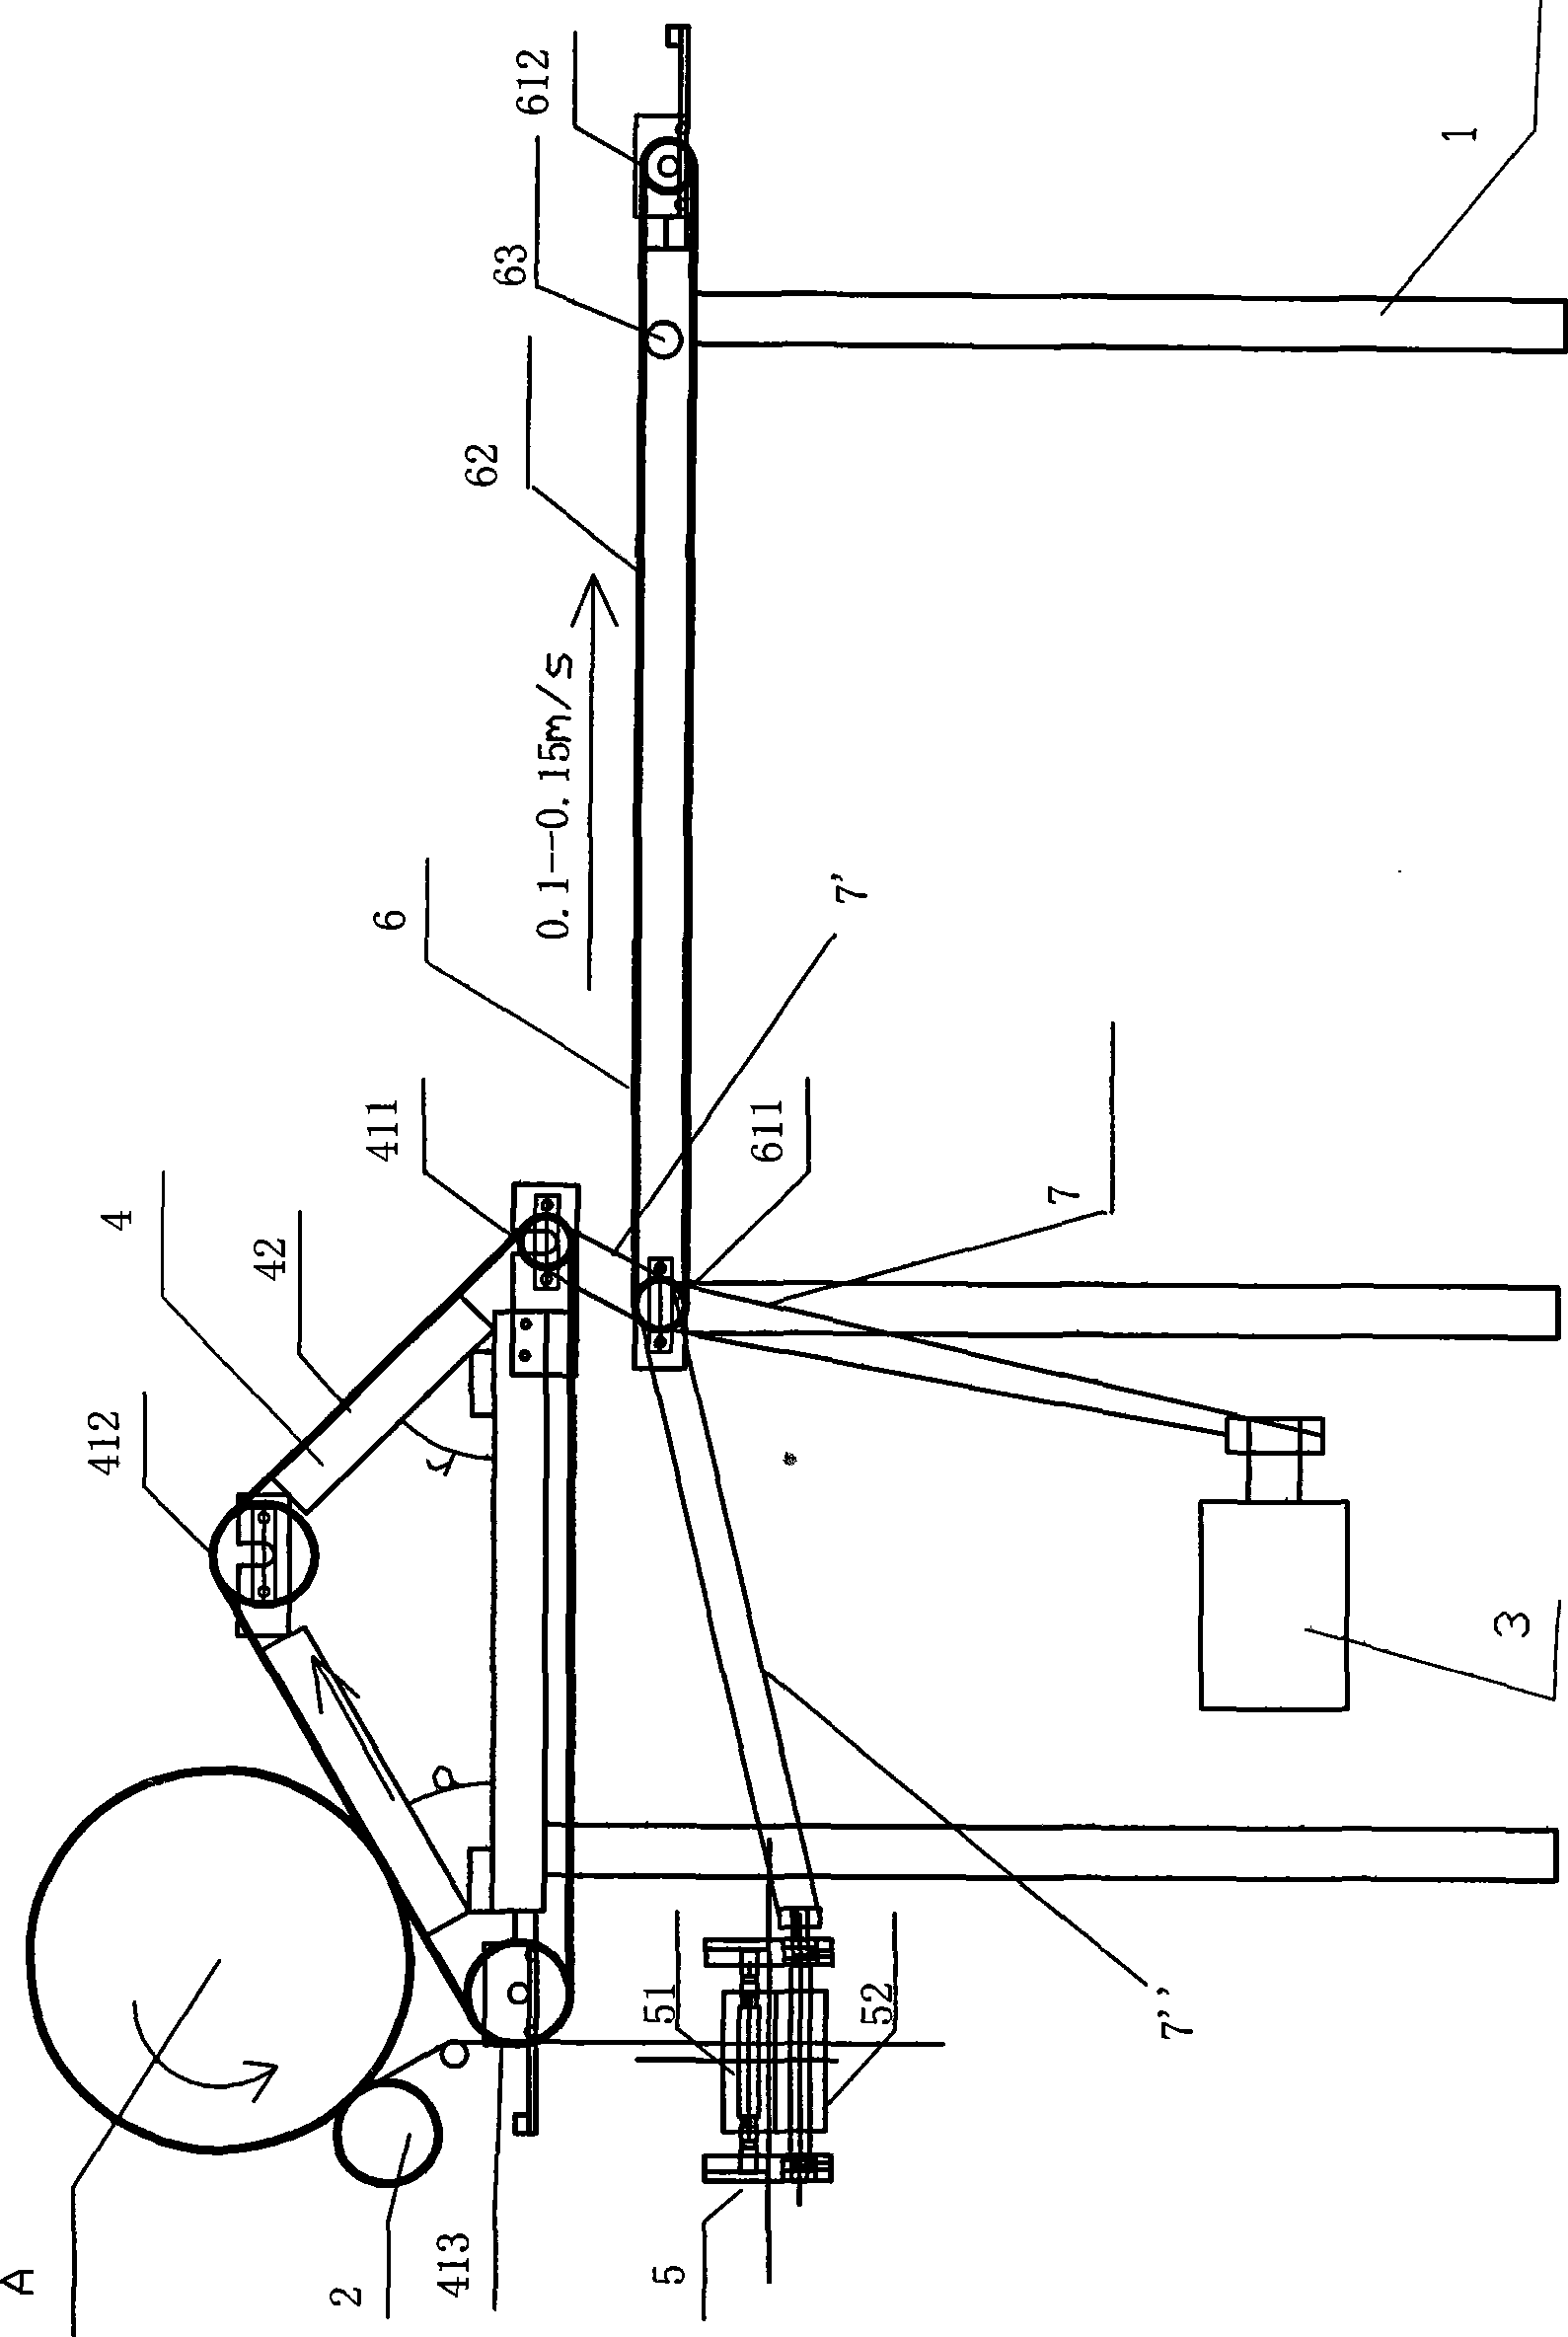 Mechanical device for automatically opening flax round packages from flax